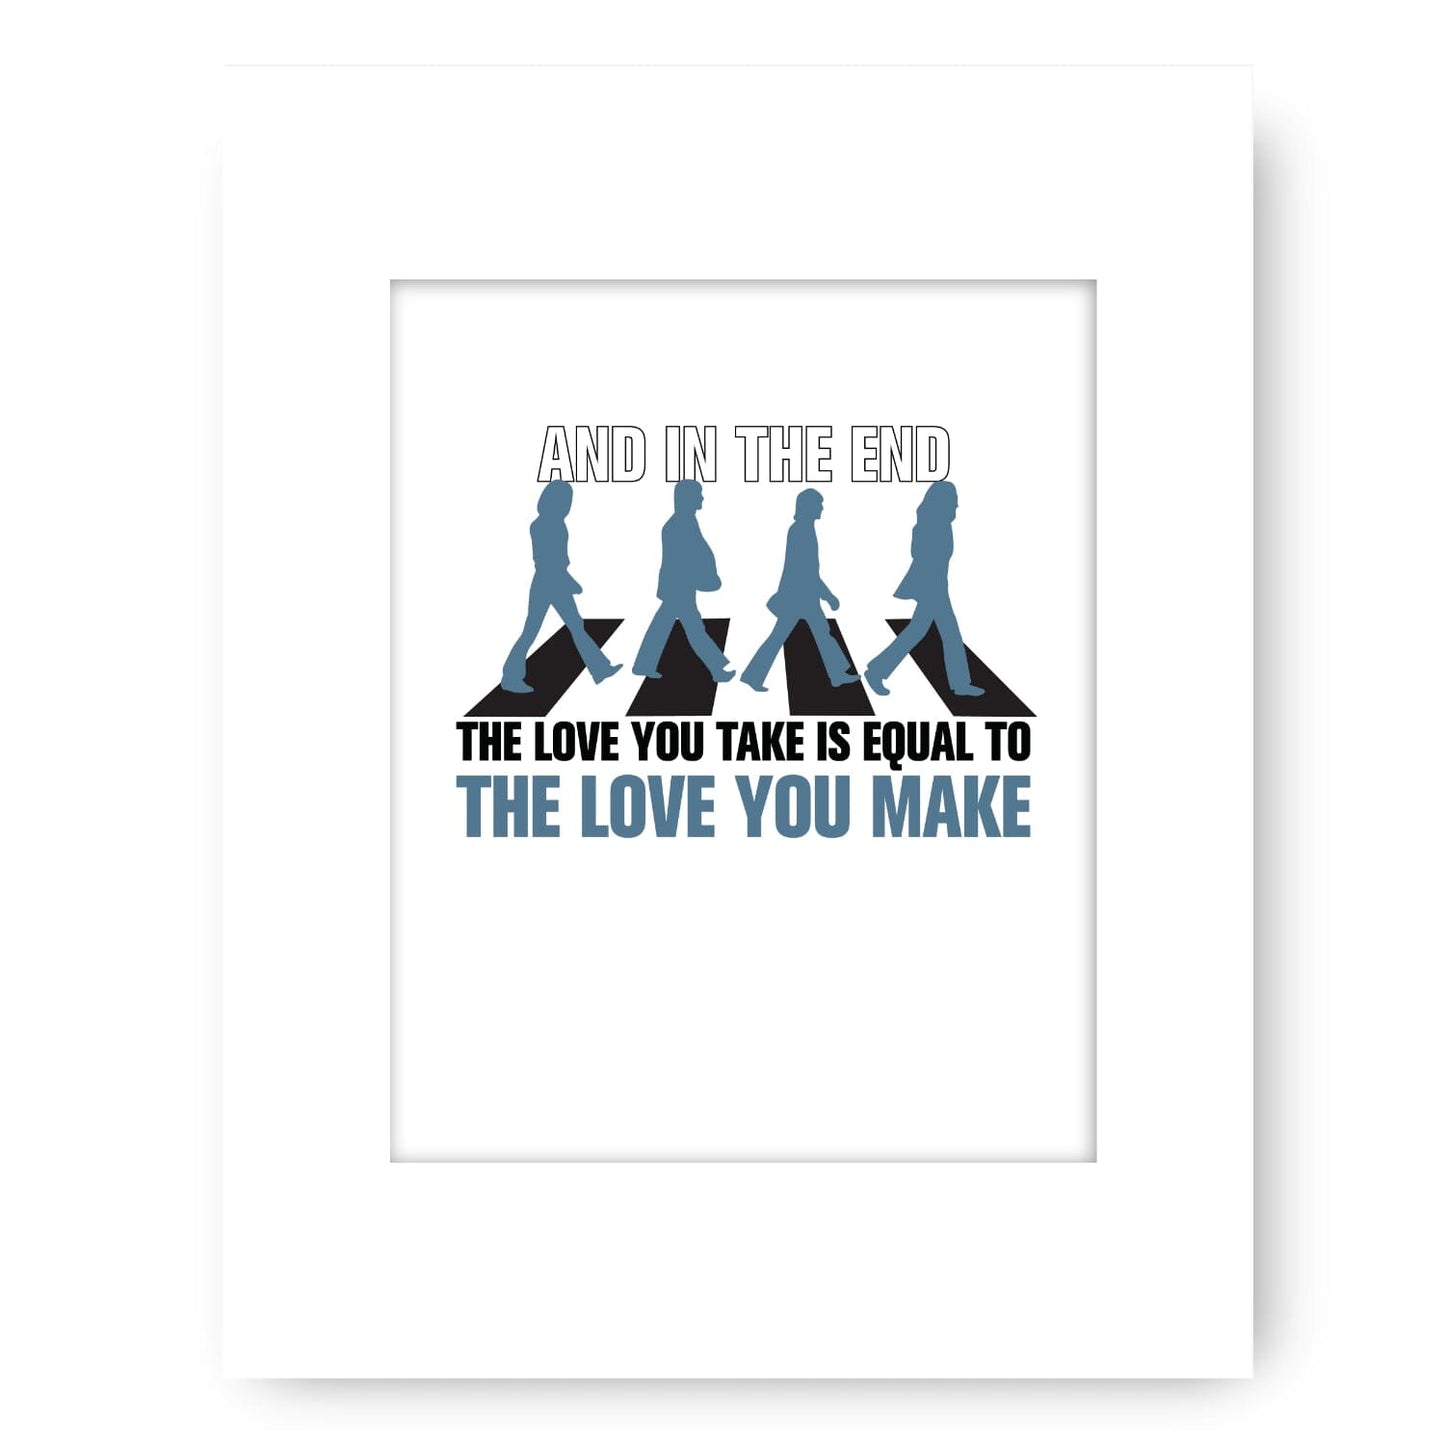 The End by the Beatles - Song Lyric Music Poster Art Print Song Lyrics Art Song Lyrics Art 8x10 White Matted Print 